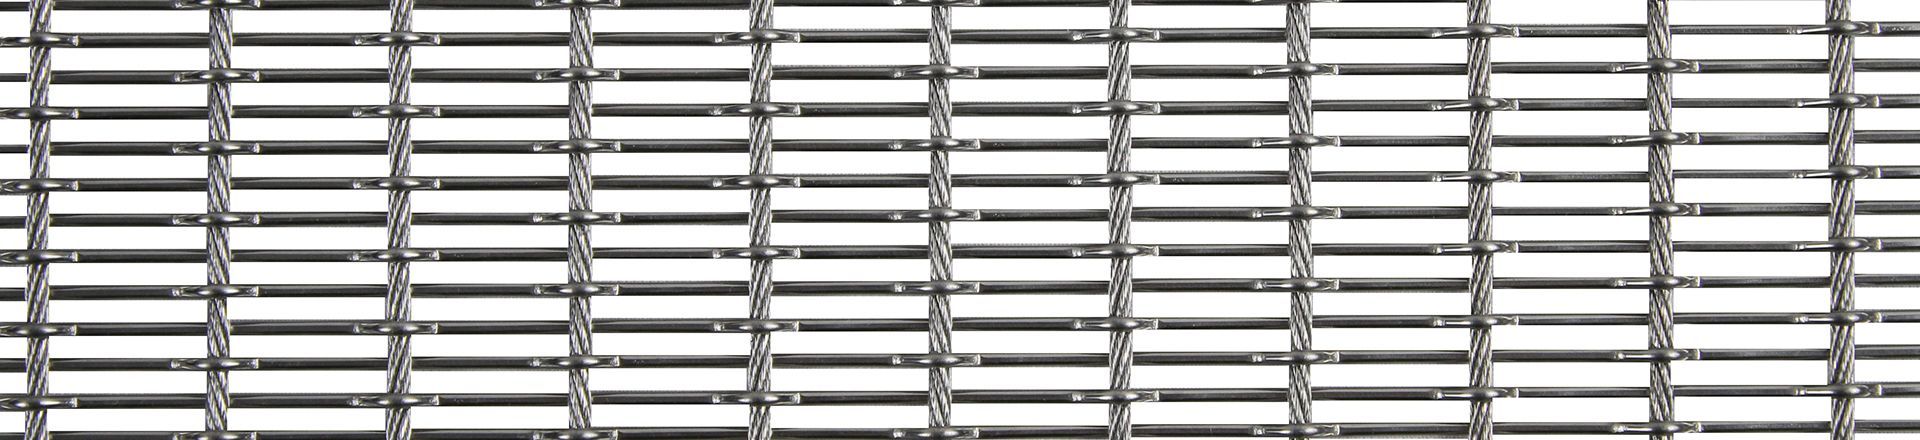 Stainless Steel Architectural Wire Mesh for Security HJS-G175